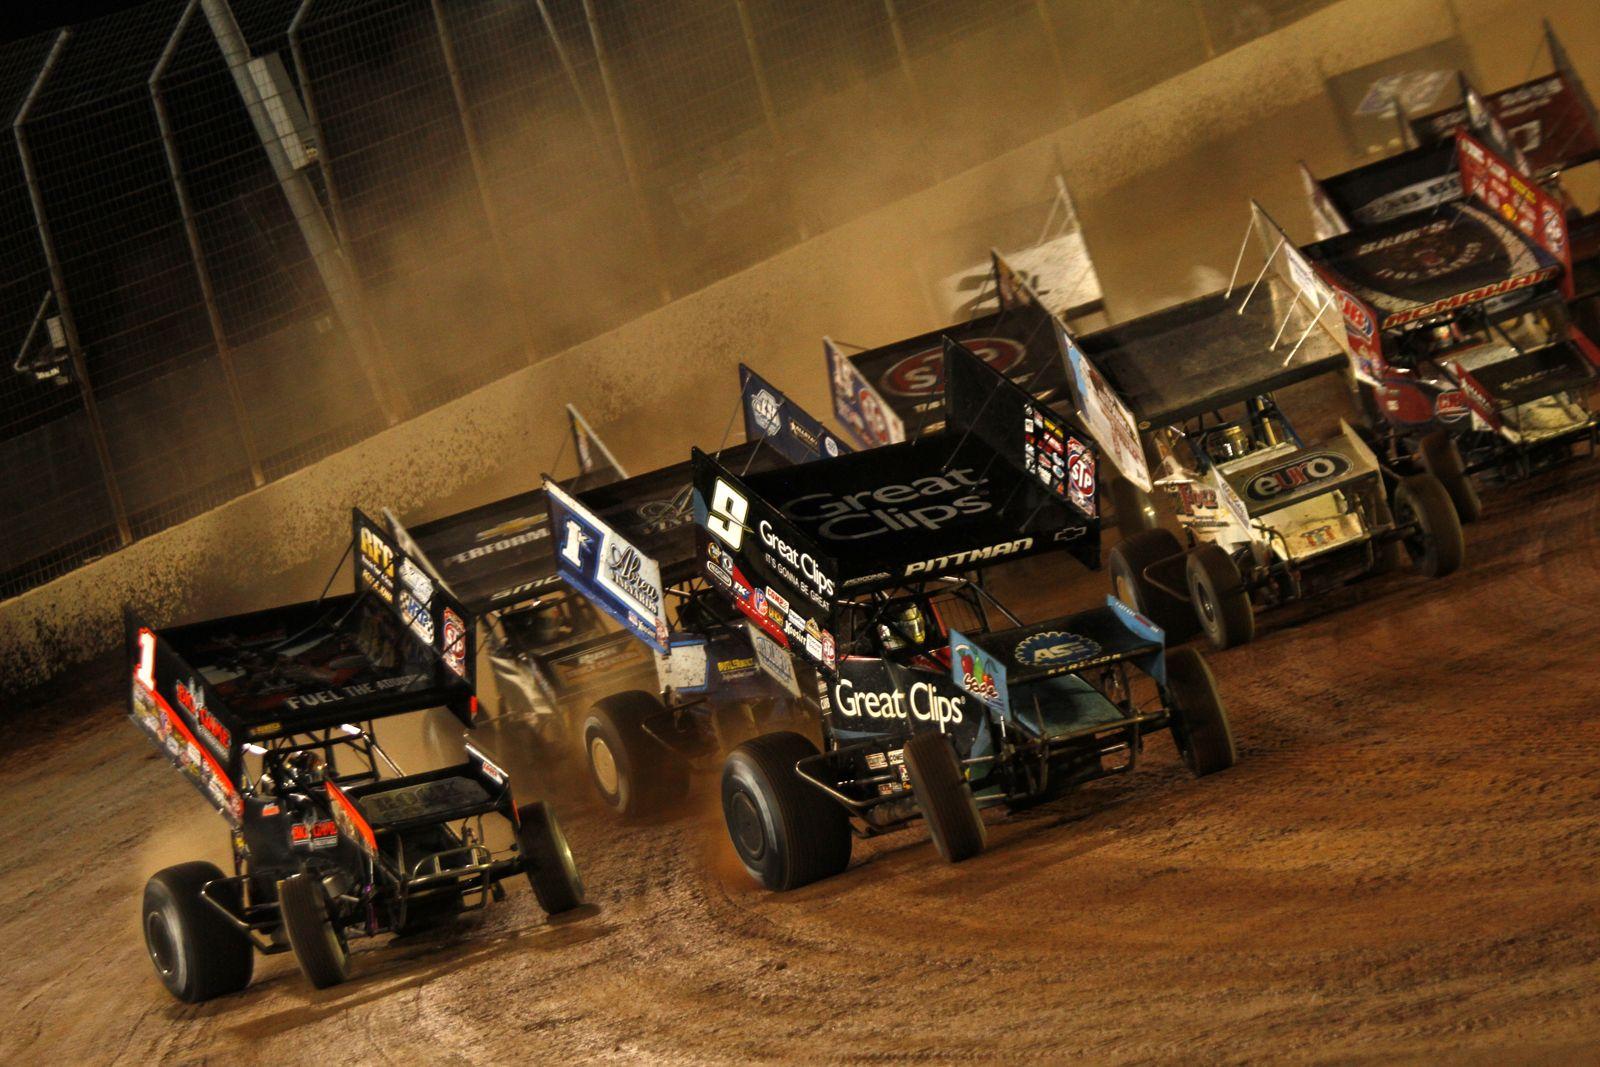 World of Outlaws Wallpaper Free World of Outlaws Background